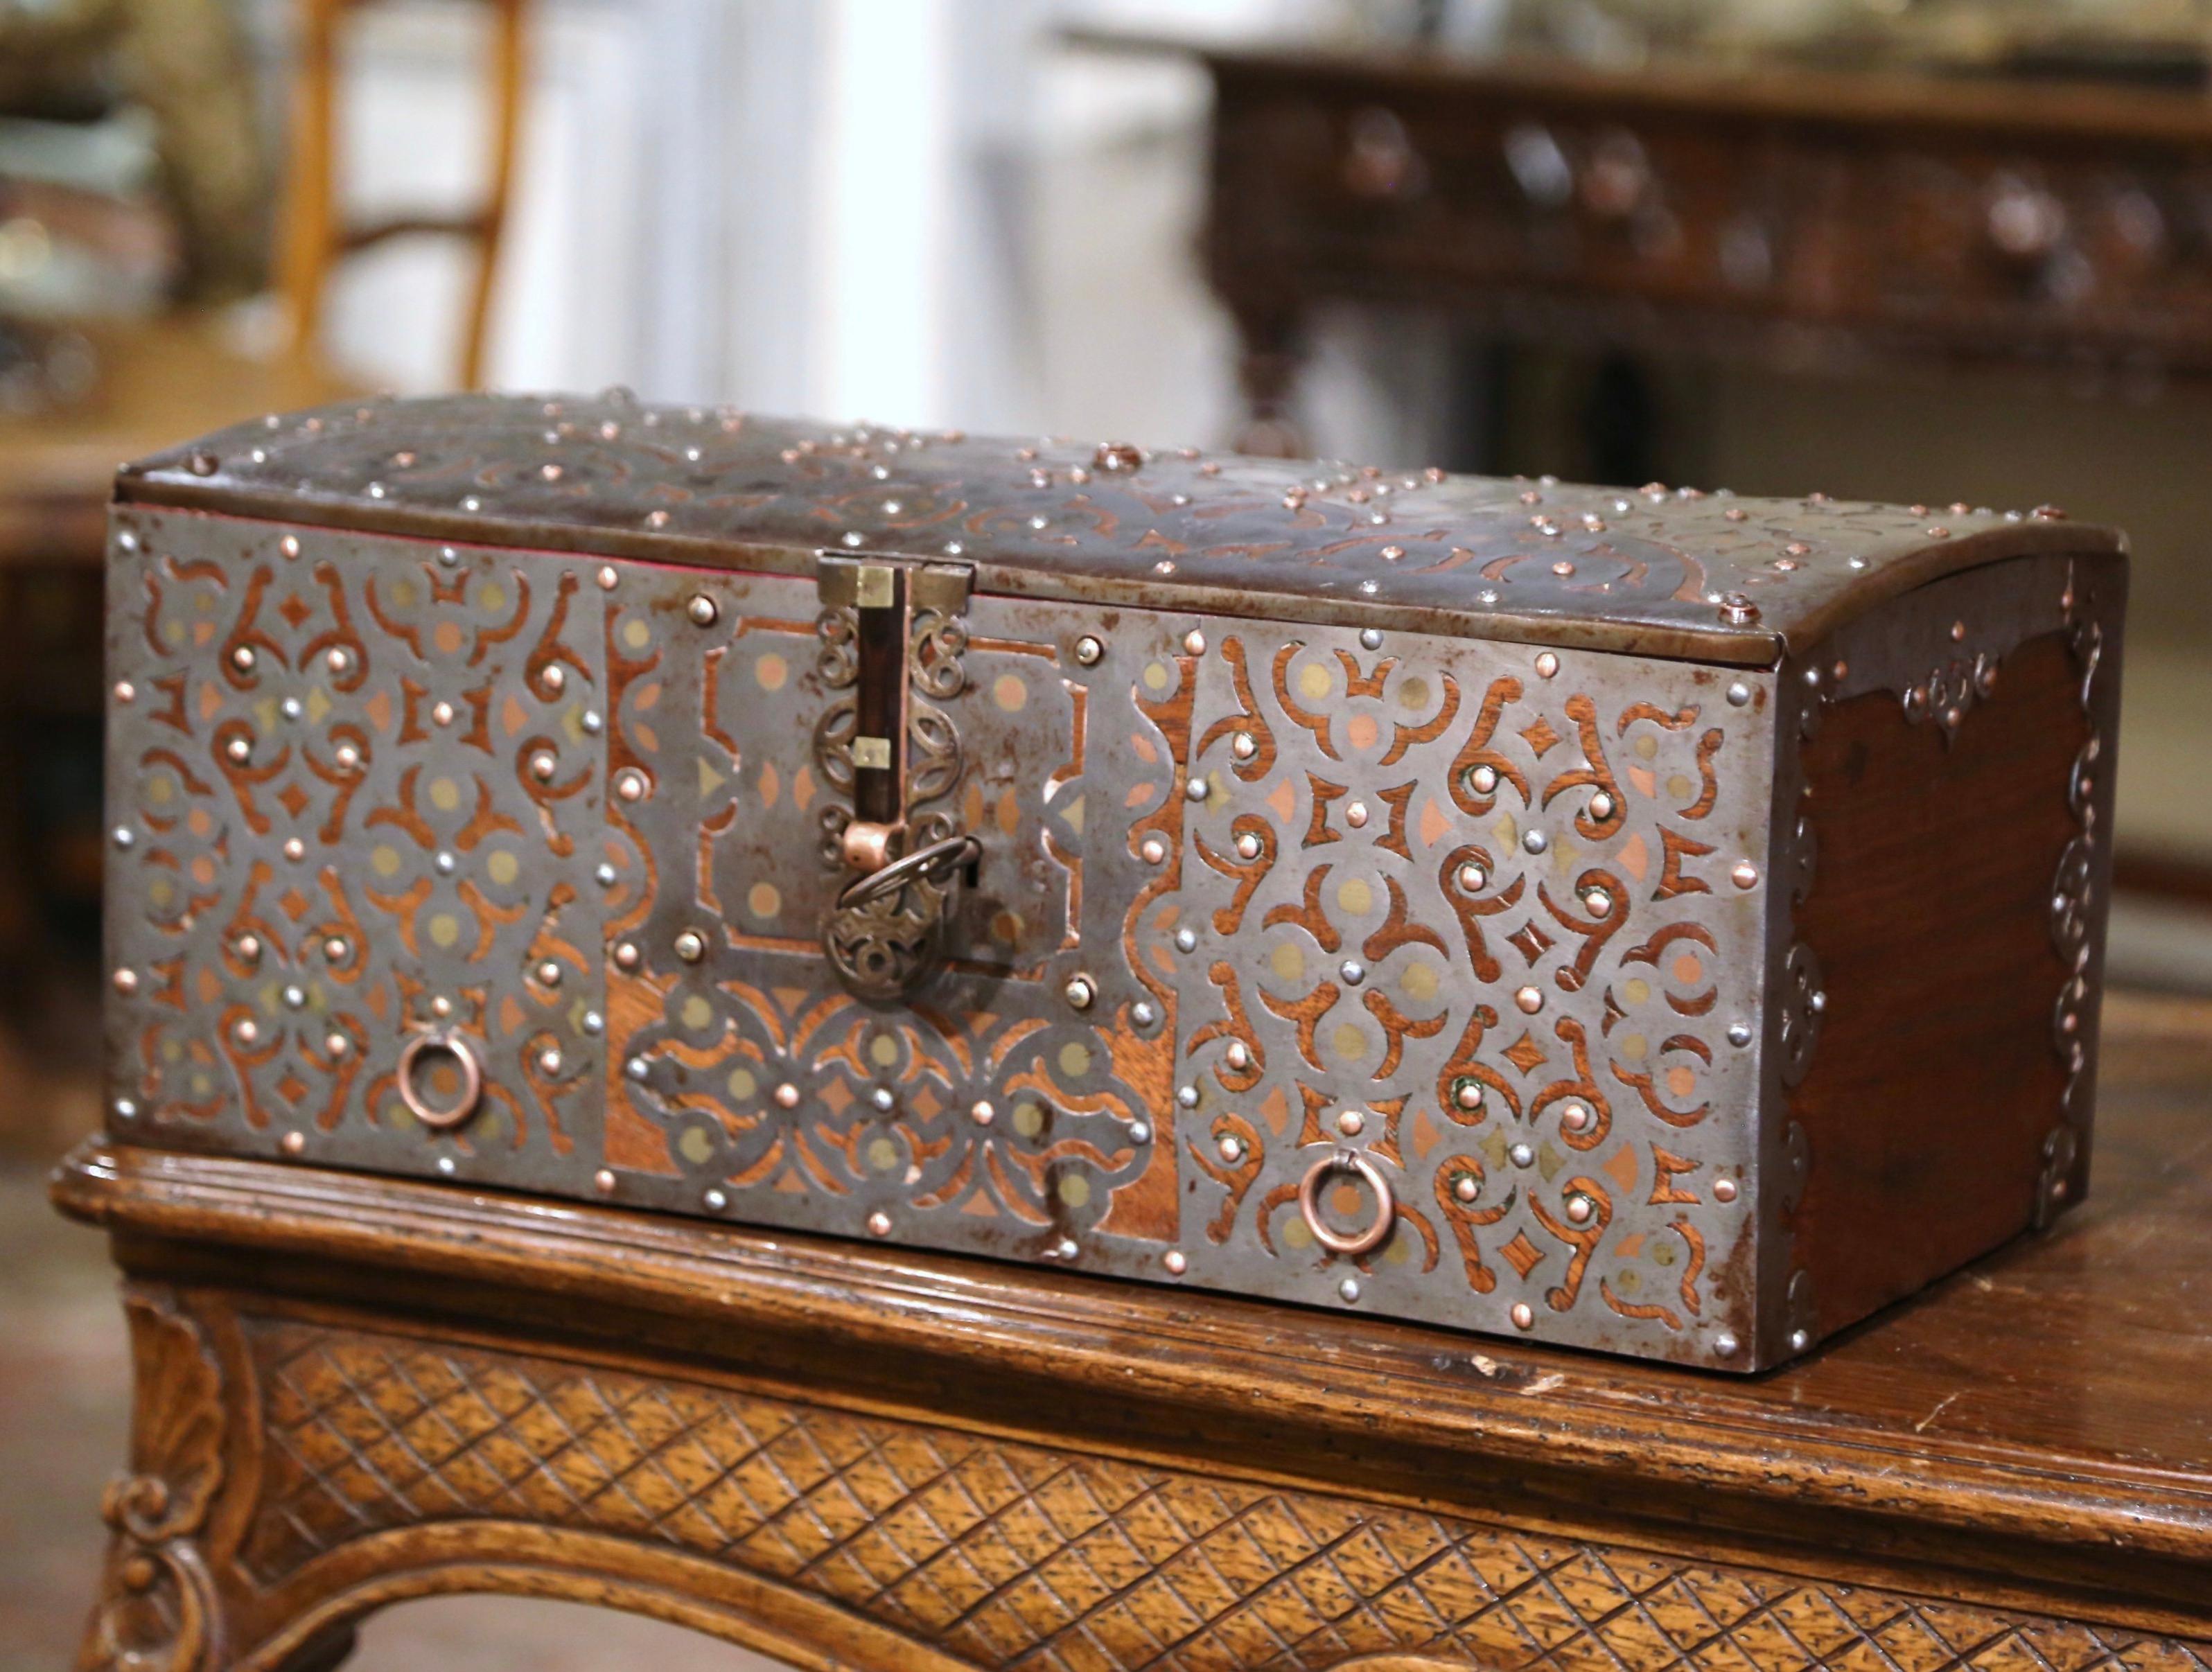 Decorate a shelf or a counter with this elegant antique decorative trunk. Crafted in Spain circa 1880, the strong box is decorated with pierced and engraved geometric motifs throughout. The Gothic style casket is in excellent condition commensurate